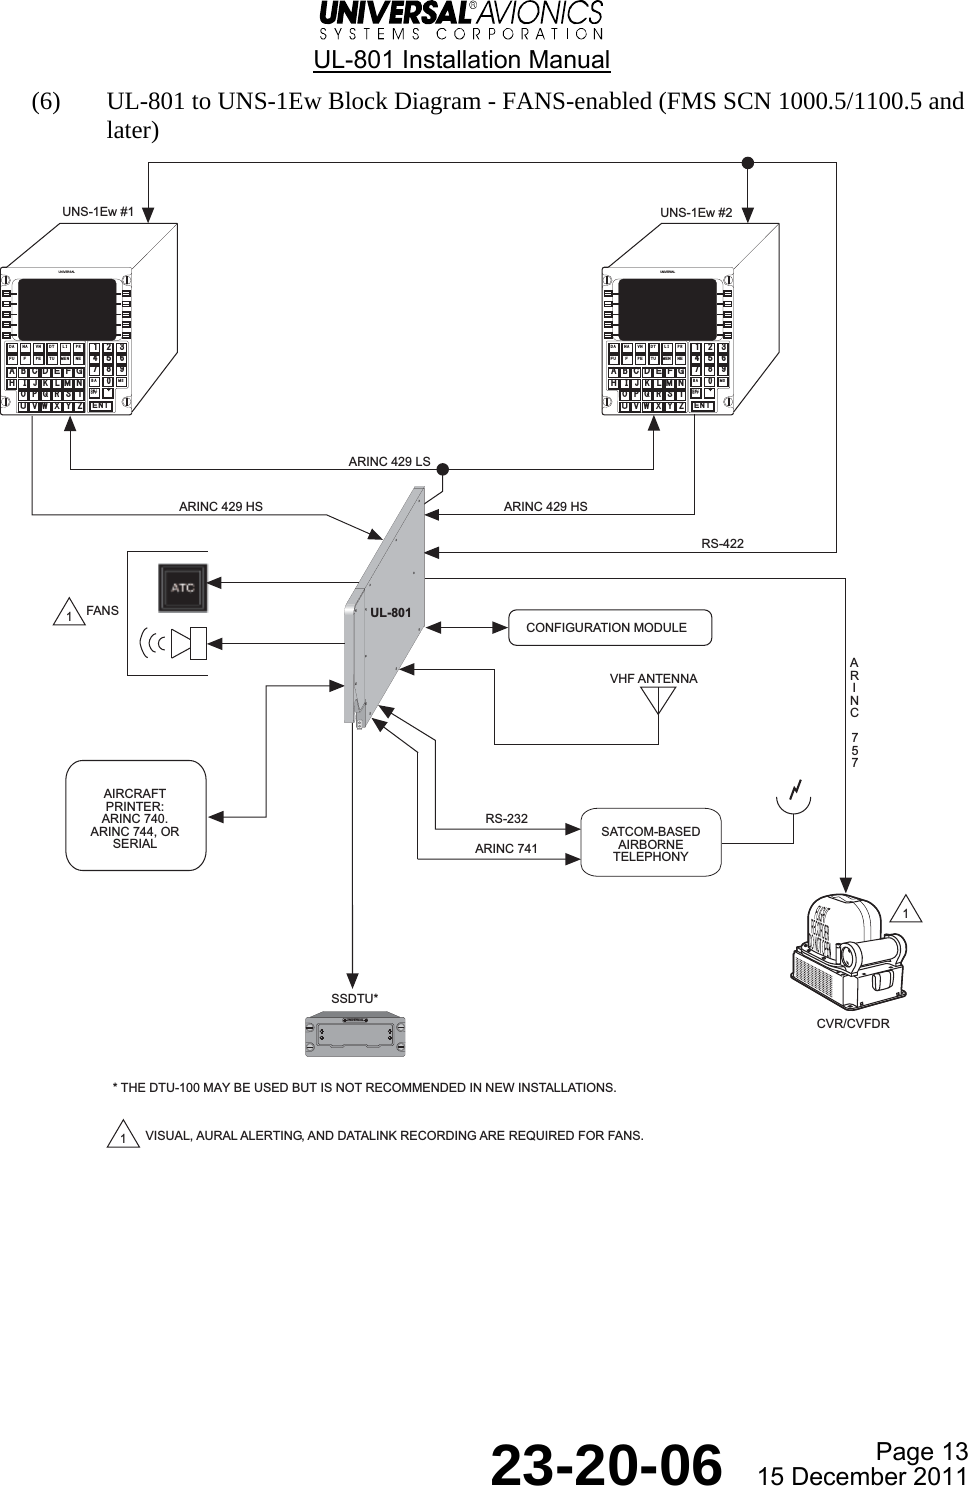  UL-801 Installation Manual  Page 13  23-20-06  15 December 2011 (6) UL-801 to UNS-1Ew Block Diagram - FANS-enabled (FMS SCN 1000.5/1100.5 and later)   UNS-1Ew #1 UNS-1Ew #2ARINC 429 HSRS-422ARINC 429 HSARINC 429 LSSATCOM-BASEDAIRBORNETELEPHONYCVR/CVFDRUL-801UNIVERSALDA NA VN DT LI PRFU F PE TU MEN NEABCDEFGHIJKLMNOPQRSTUVWXYZ1234567890BA MSON/OFF±ENTUNIVERSALDA NA VN DT LI PRFU F PE TU MEN NEABCDEFGHIJKLMNOPQRSTUVWXYZ1234567890BA MSON/OFF±ENTFANSAIRCRAFTPRINTER:ARINC 740.ARINC 744, ORSERIAL11UNIVERSALSSDTU*1VISUAL, AURAL ALERTING, AND DATALINK RECORDING ARE REQUIRED FOR FANS.* THE DTU-100 MAY BE USED BUT IS NOT RECOMMENDED IN NEW INSTALLATIONS.VHF ANTENNARS-232ARINC 741CONFIGURATION MODULEARINC757